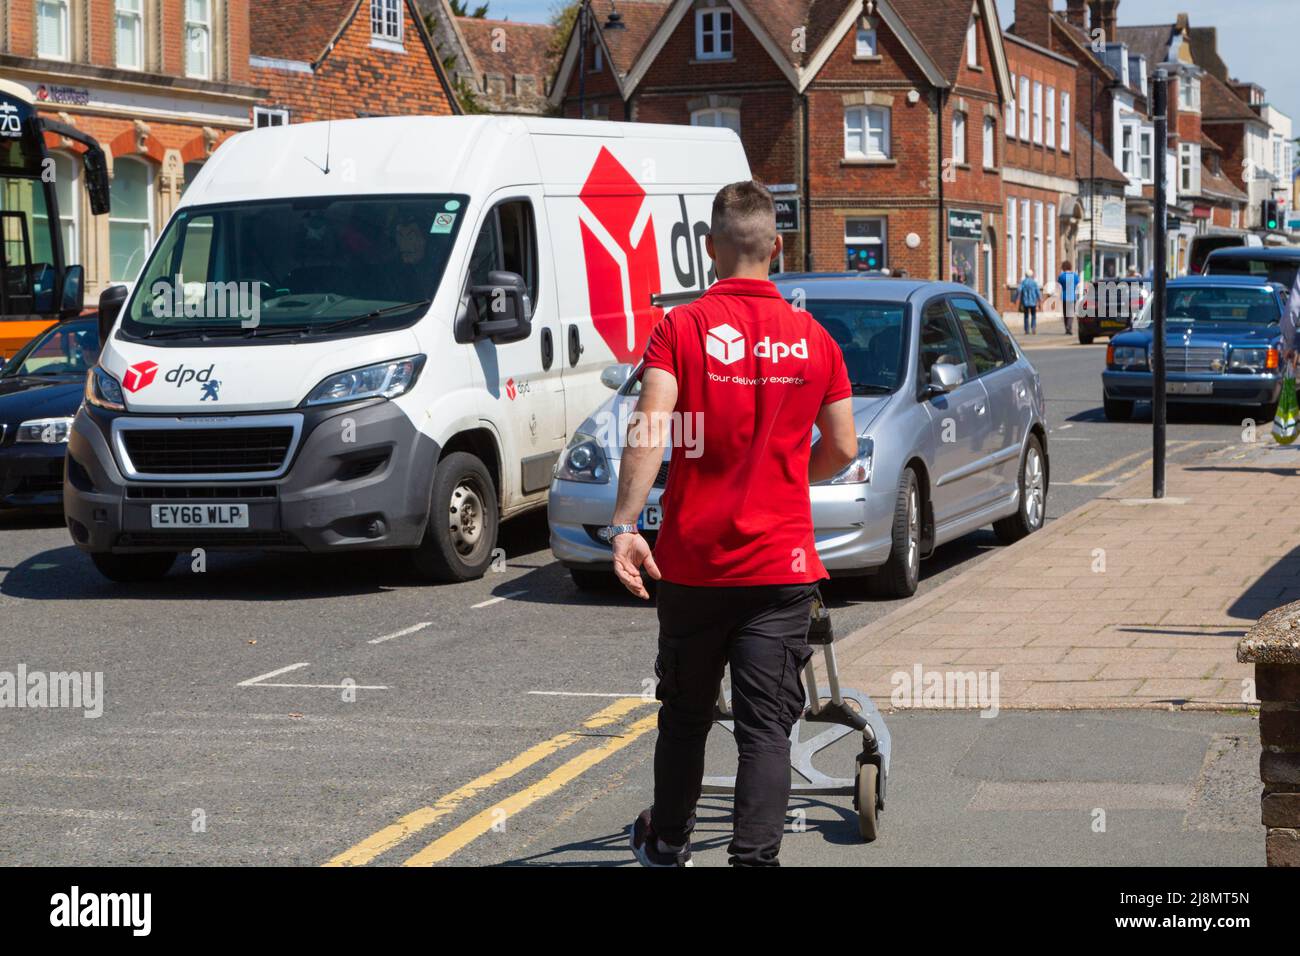 dpd delivery driver and van parked in tenterden high street, kent, uk Stock Photo